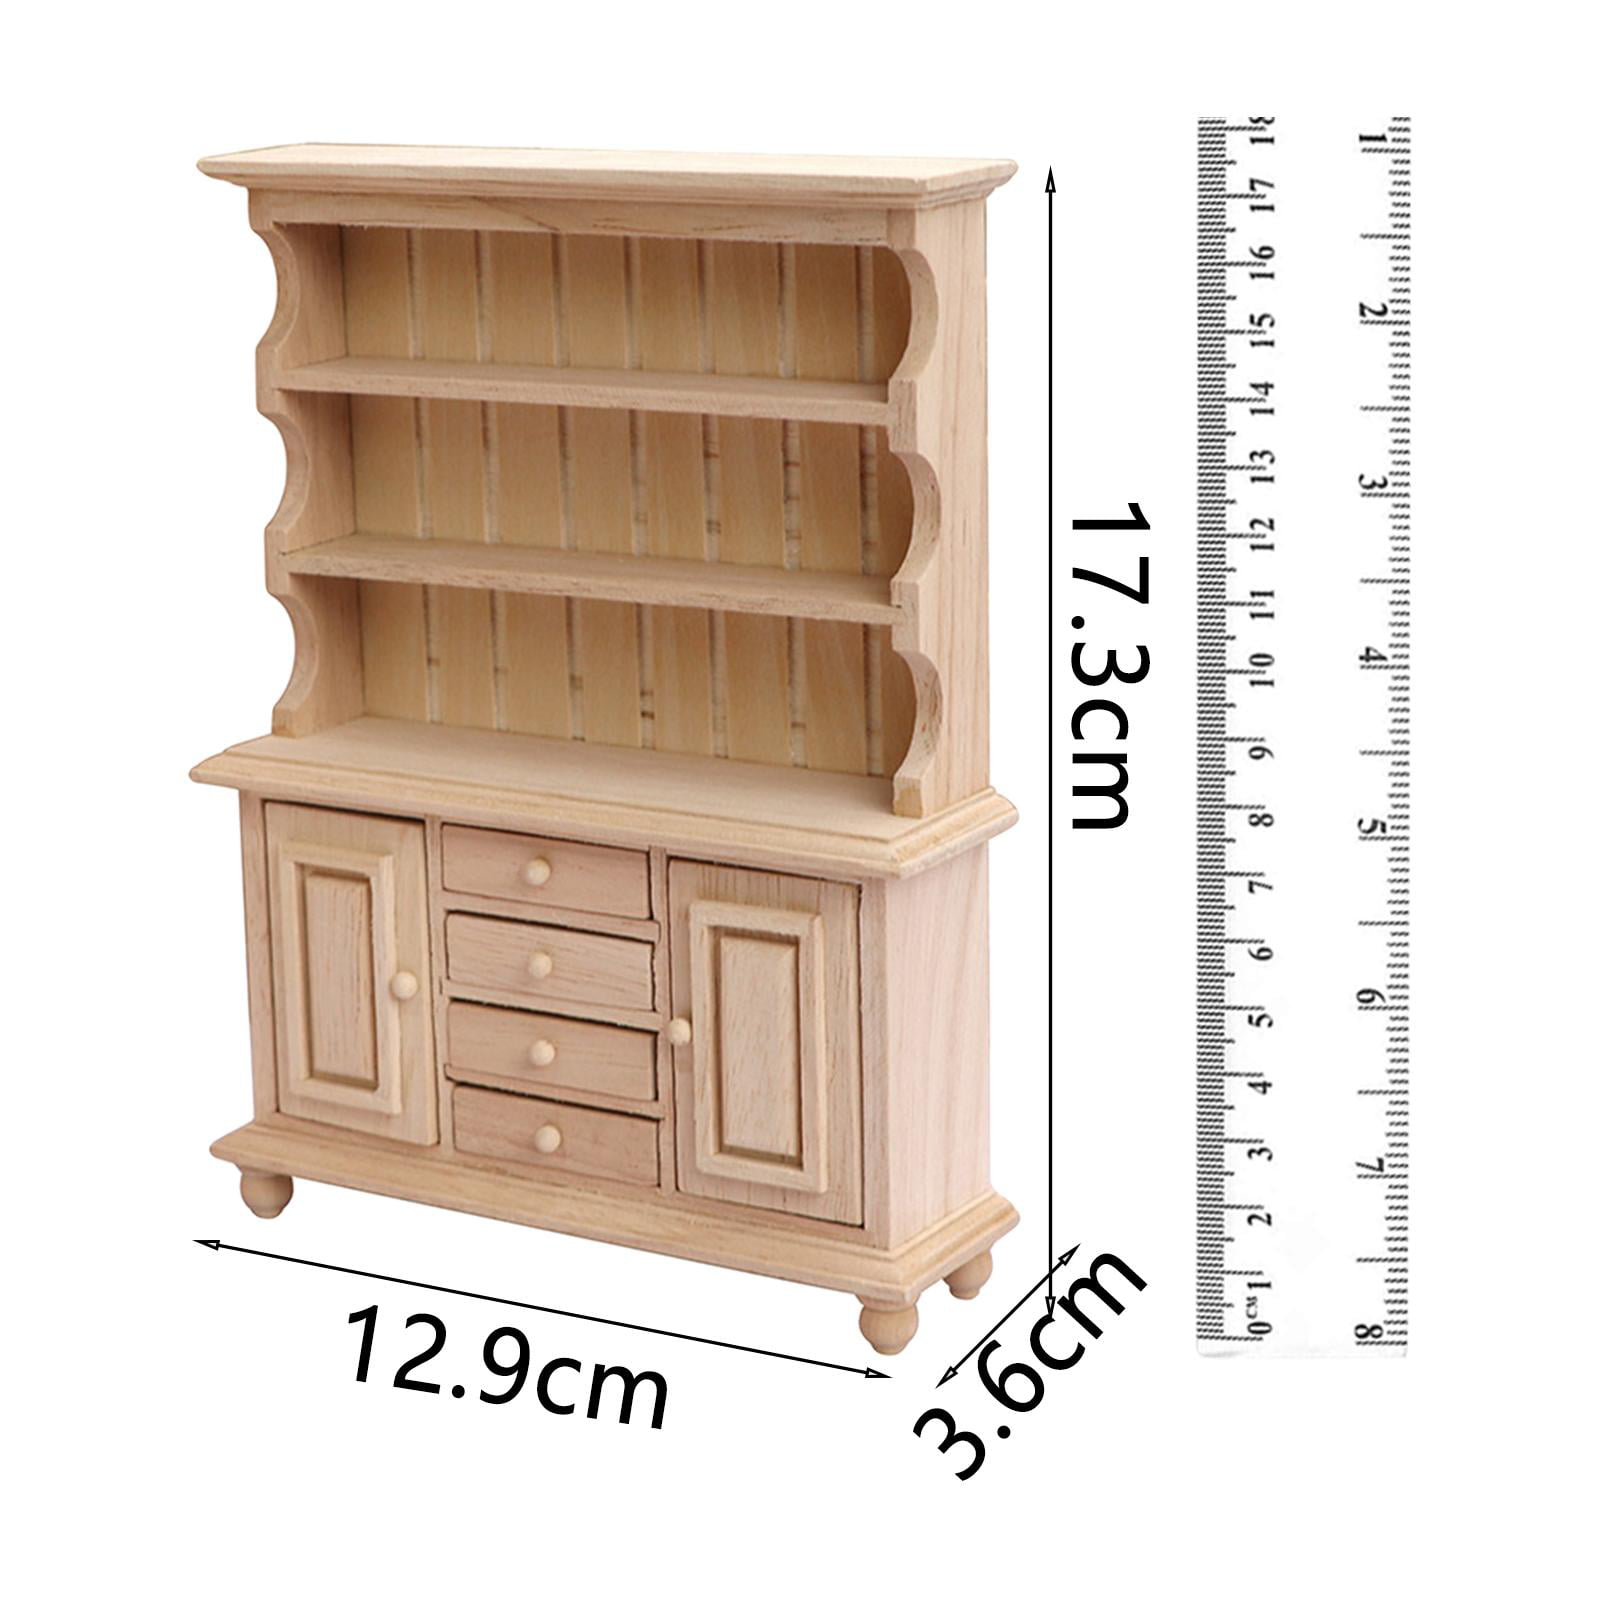 Wooden 1:12 Dollhouse Home Cabinet Furniture Pretend Play Accessory Kids Toy 